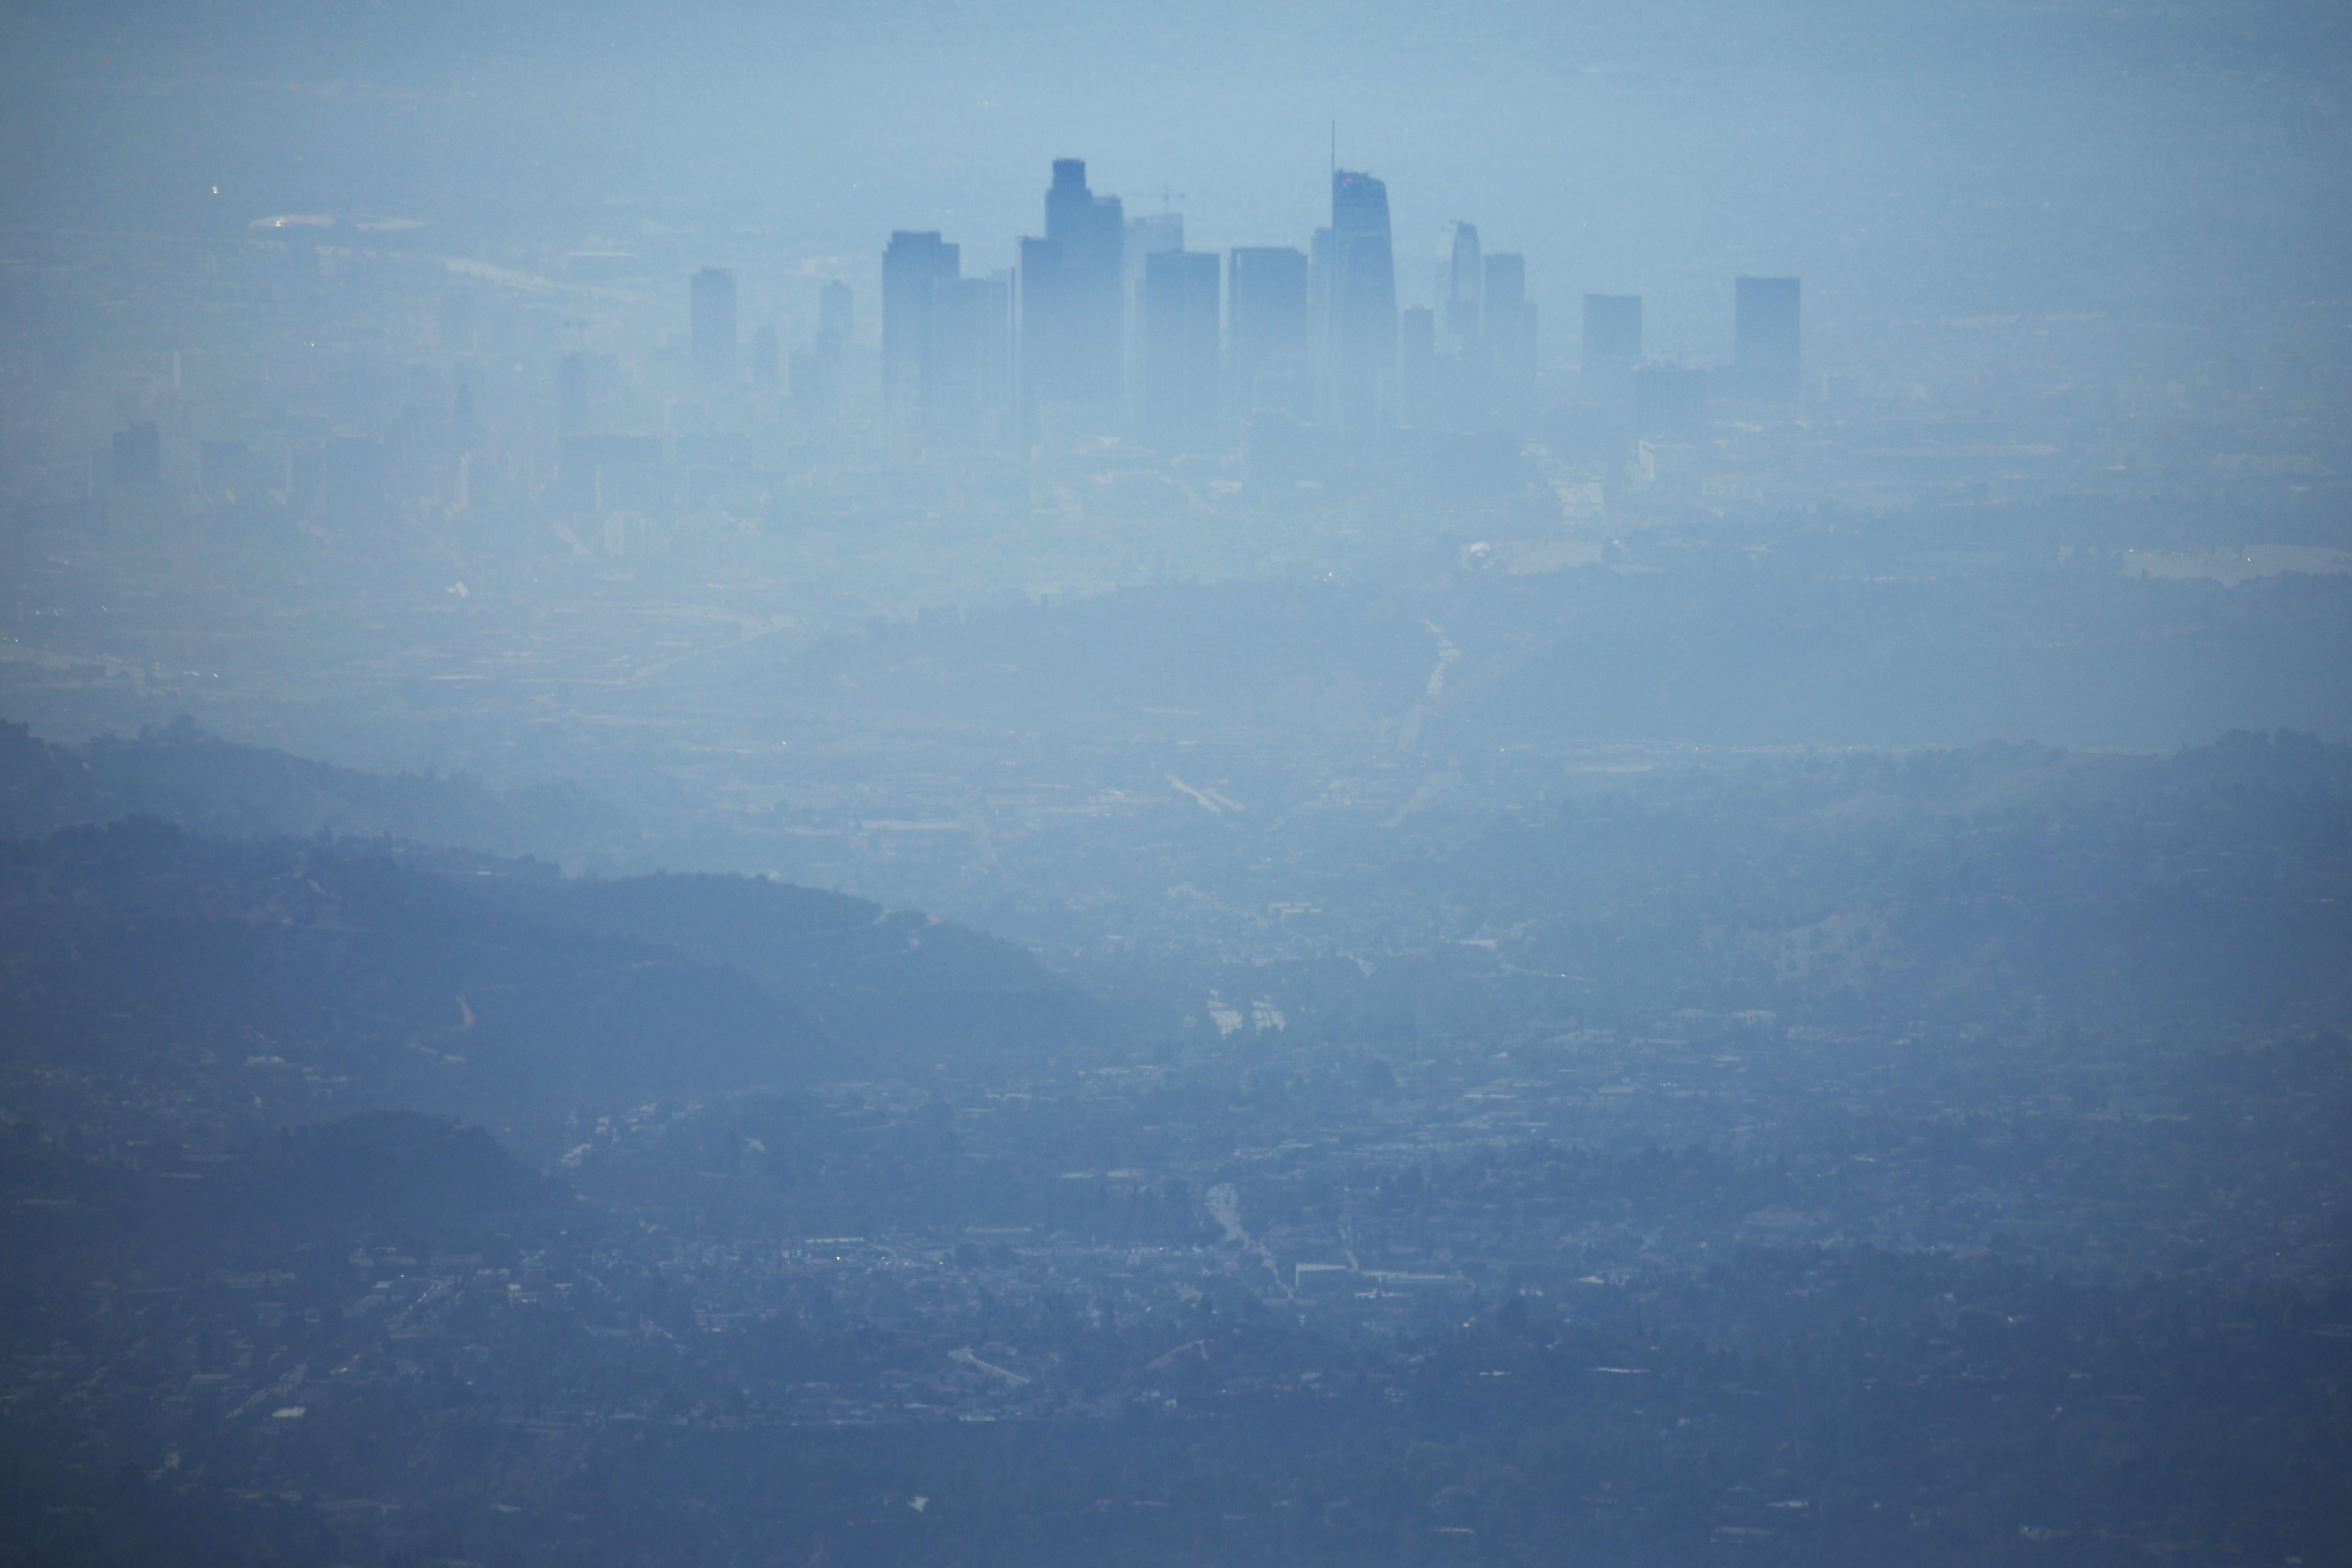 The skyline of down town Los Angeles, as seen from a nearby hilltop, is covered in hazy midday smog.